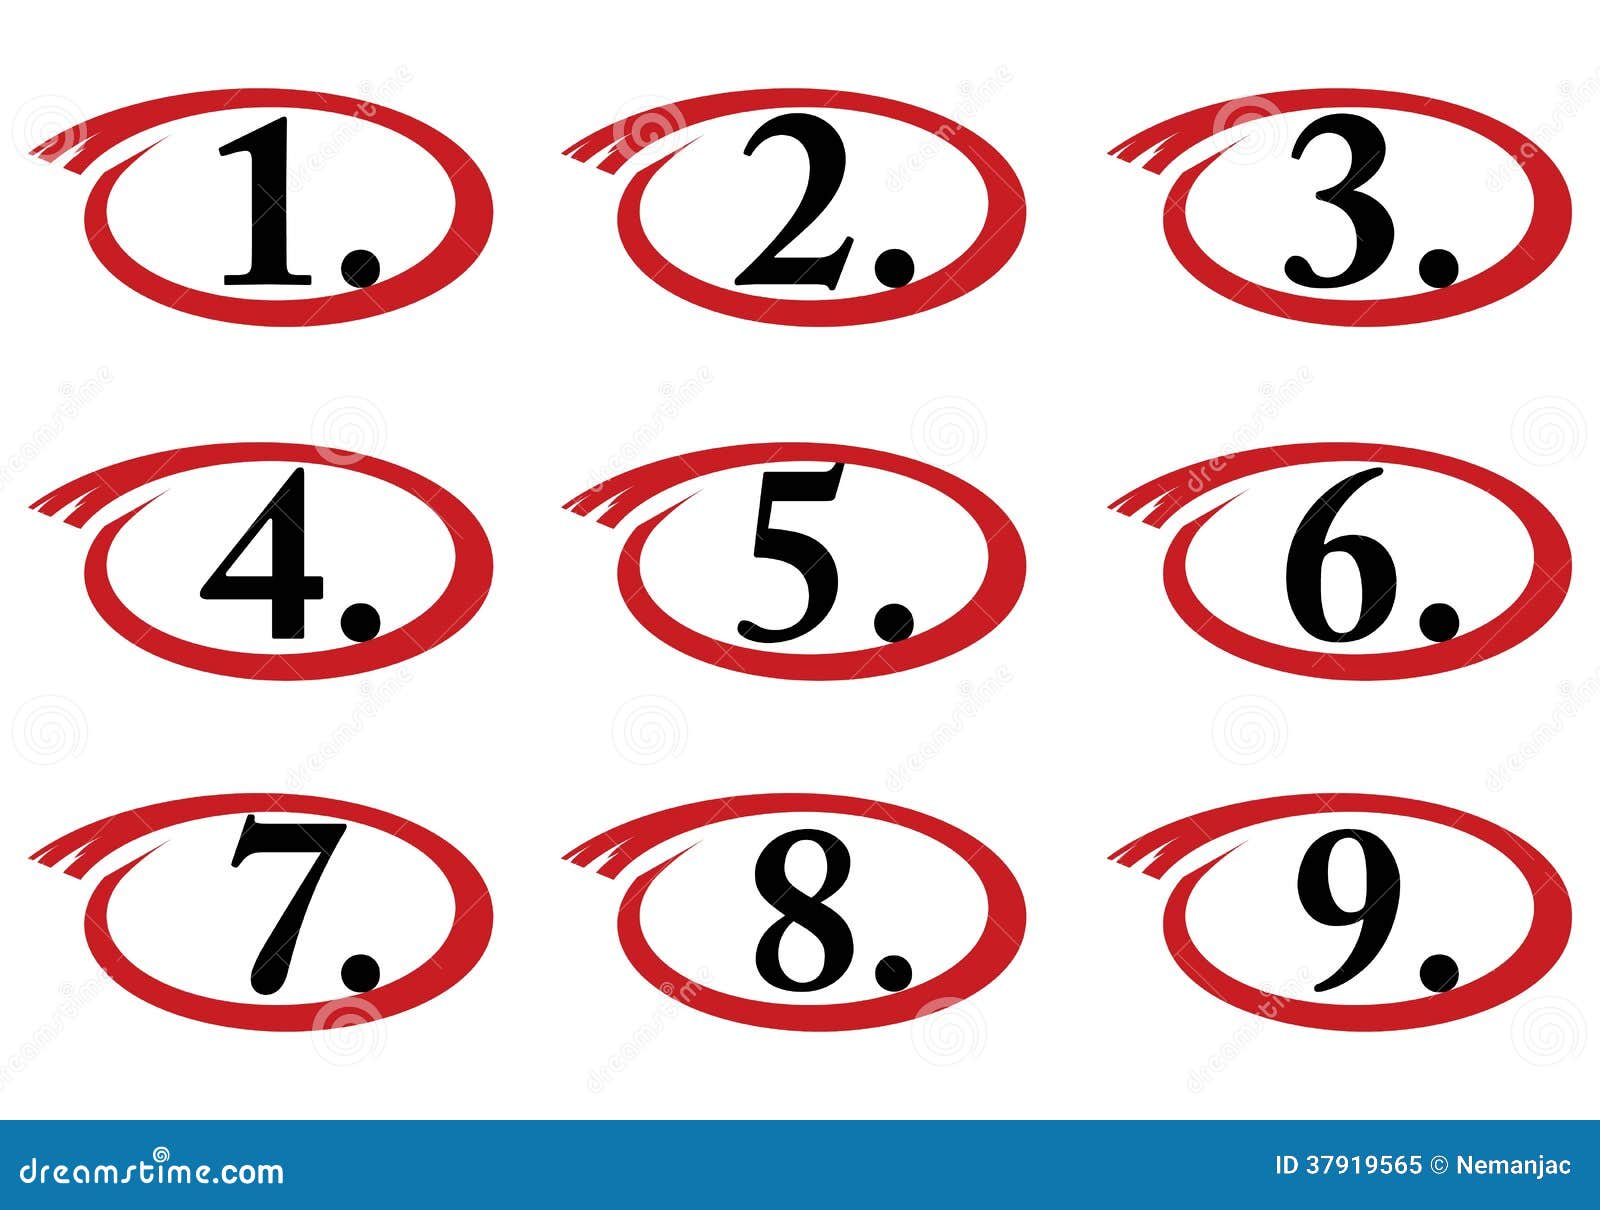 clipart numbers in circles - photo #13